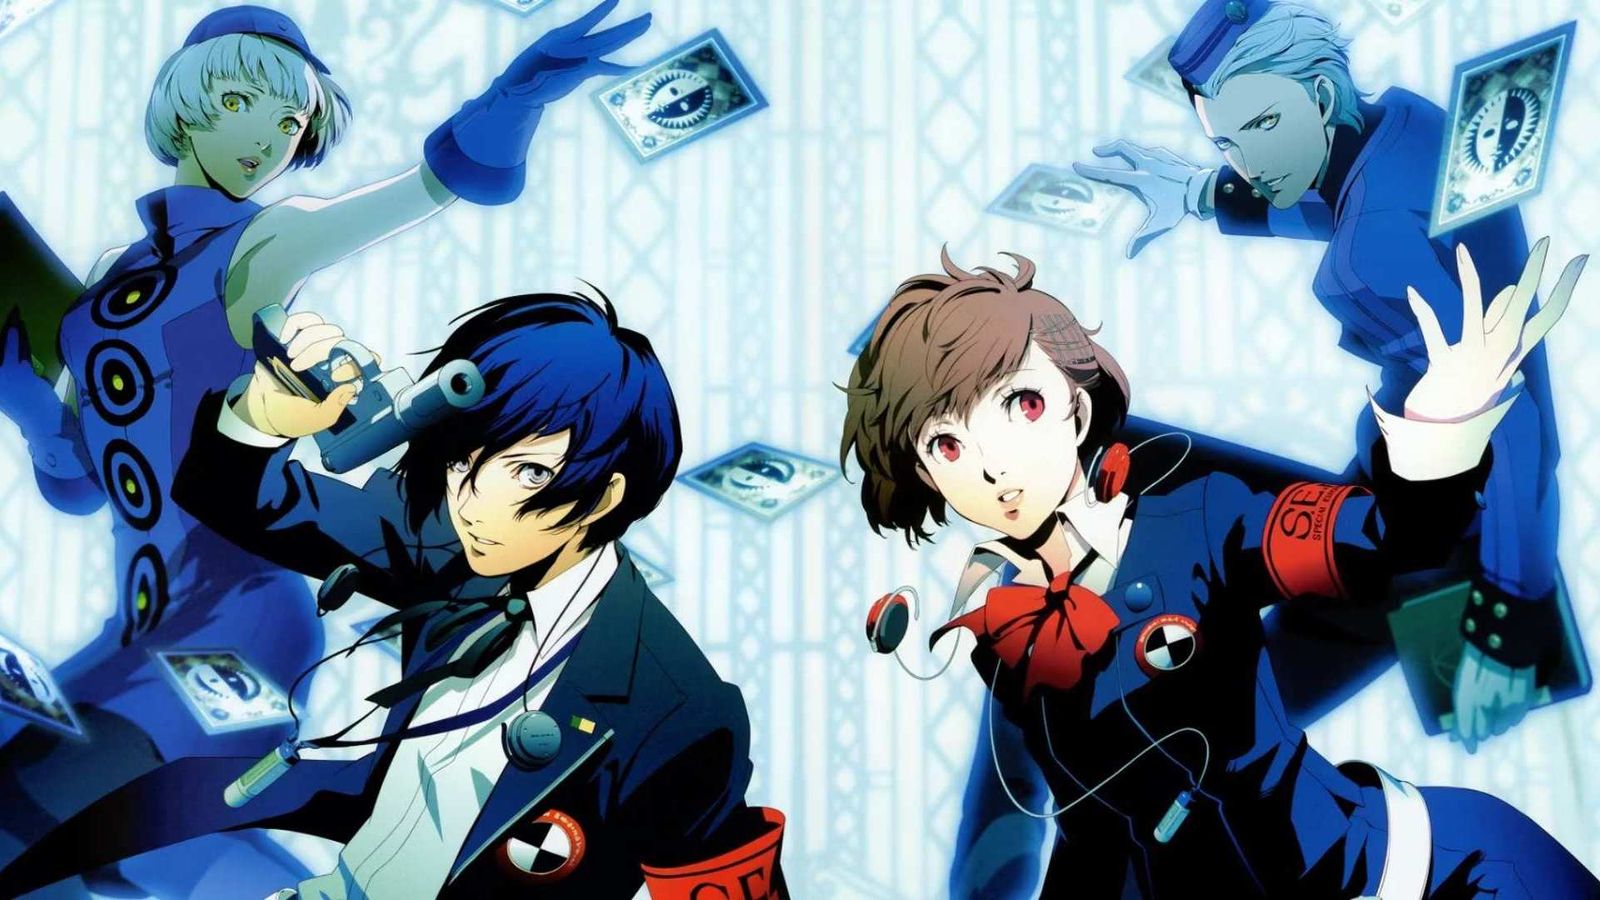 The two protagonists of Persona 3 Portable